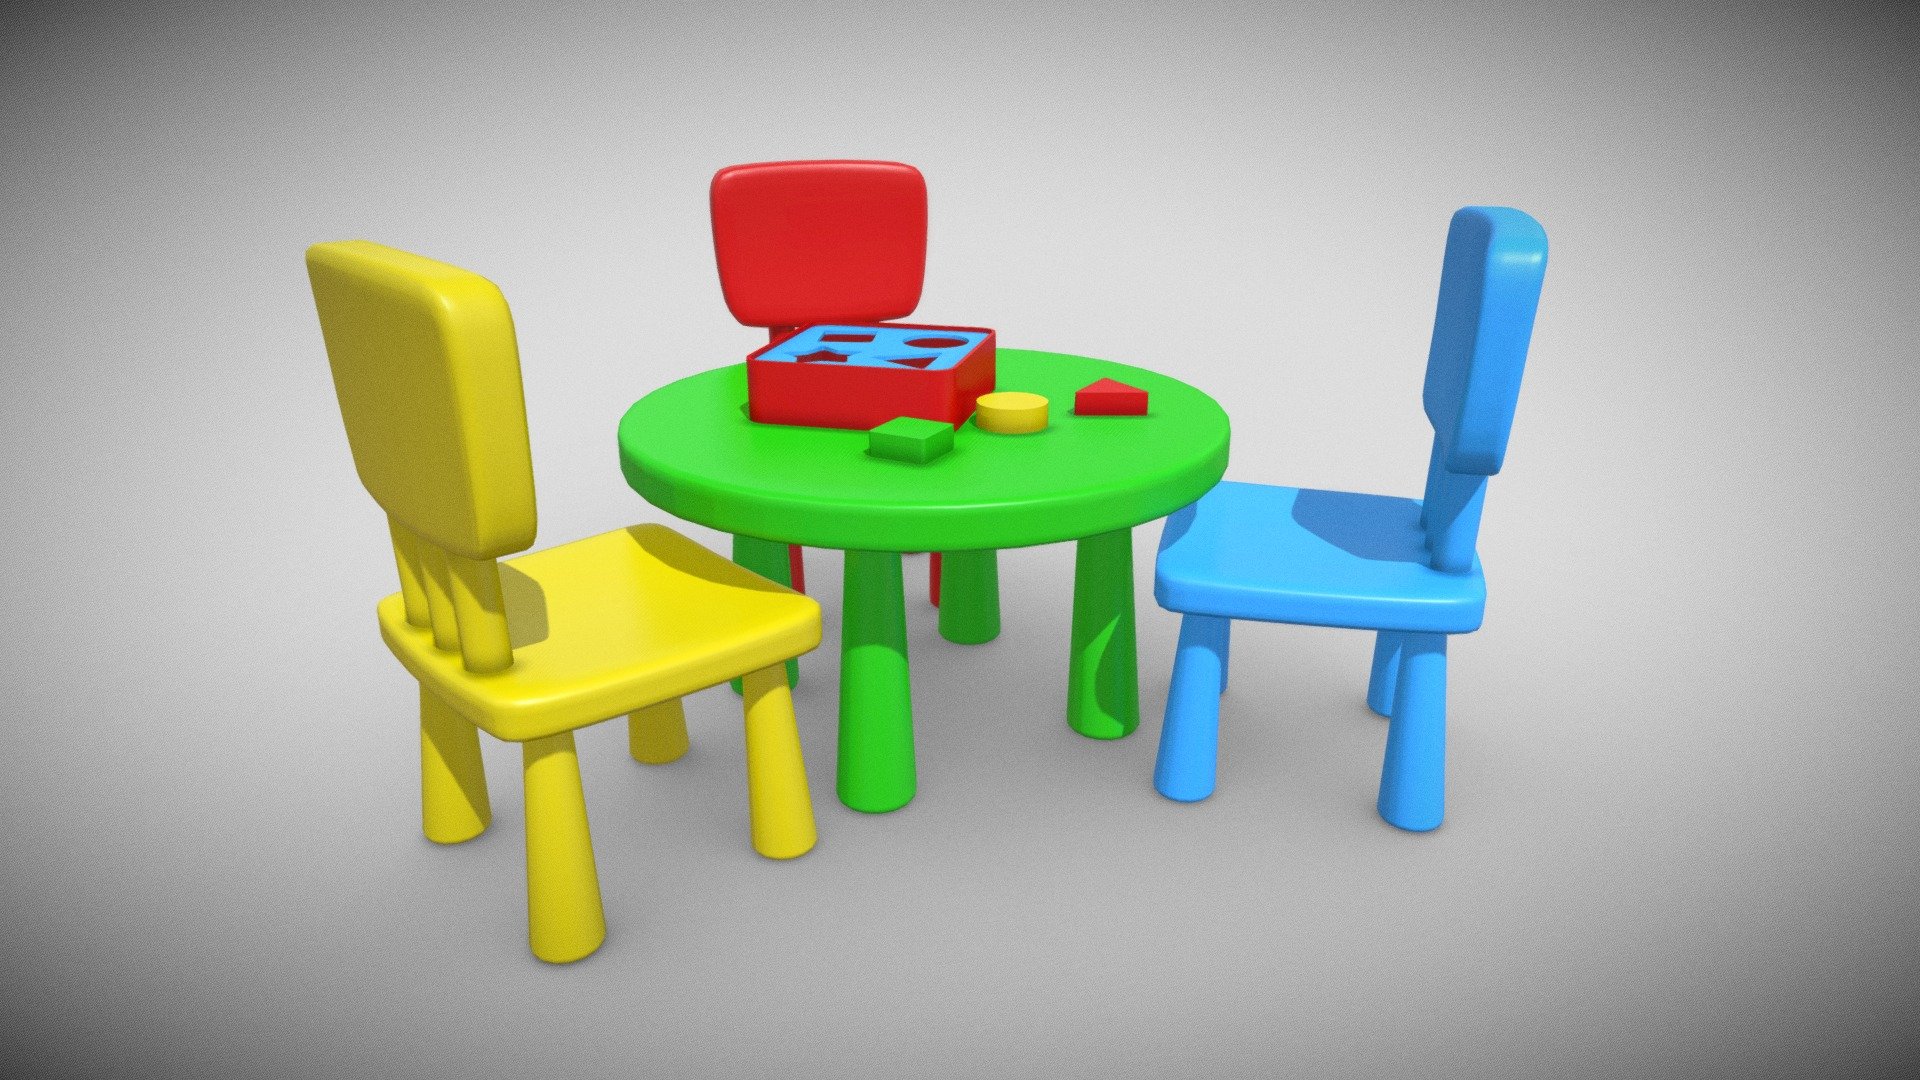 Kindergarten Table Chair can be an impressive element for your projects.
fast rendering, realistic appearance, realistic coating, low polygon 3d model